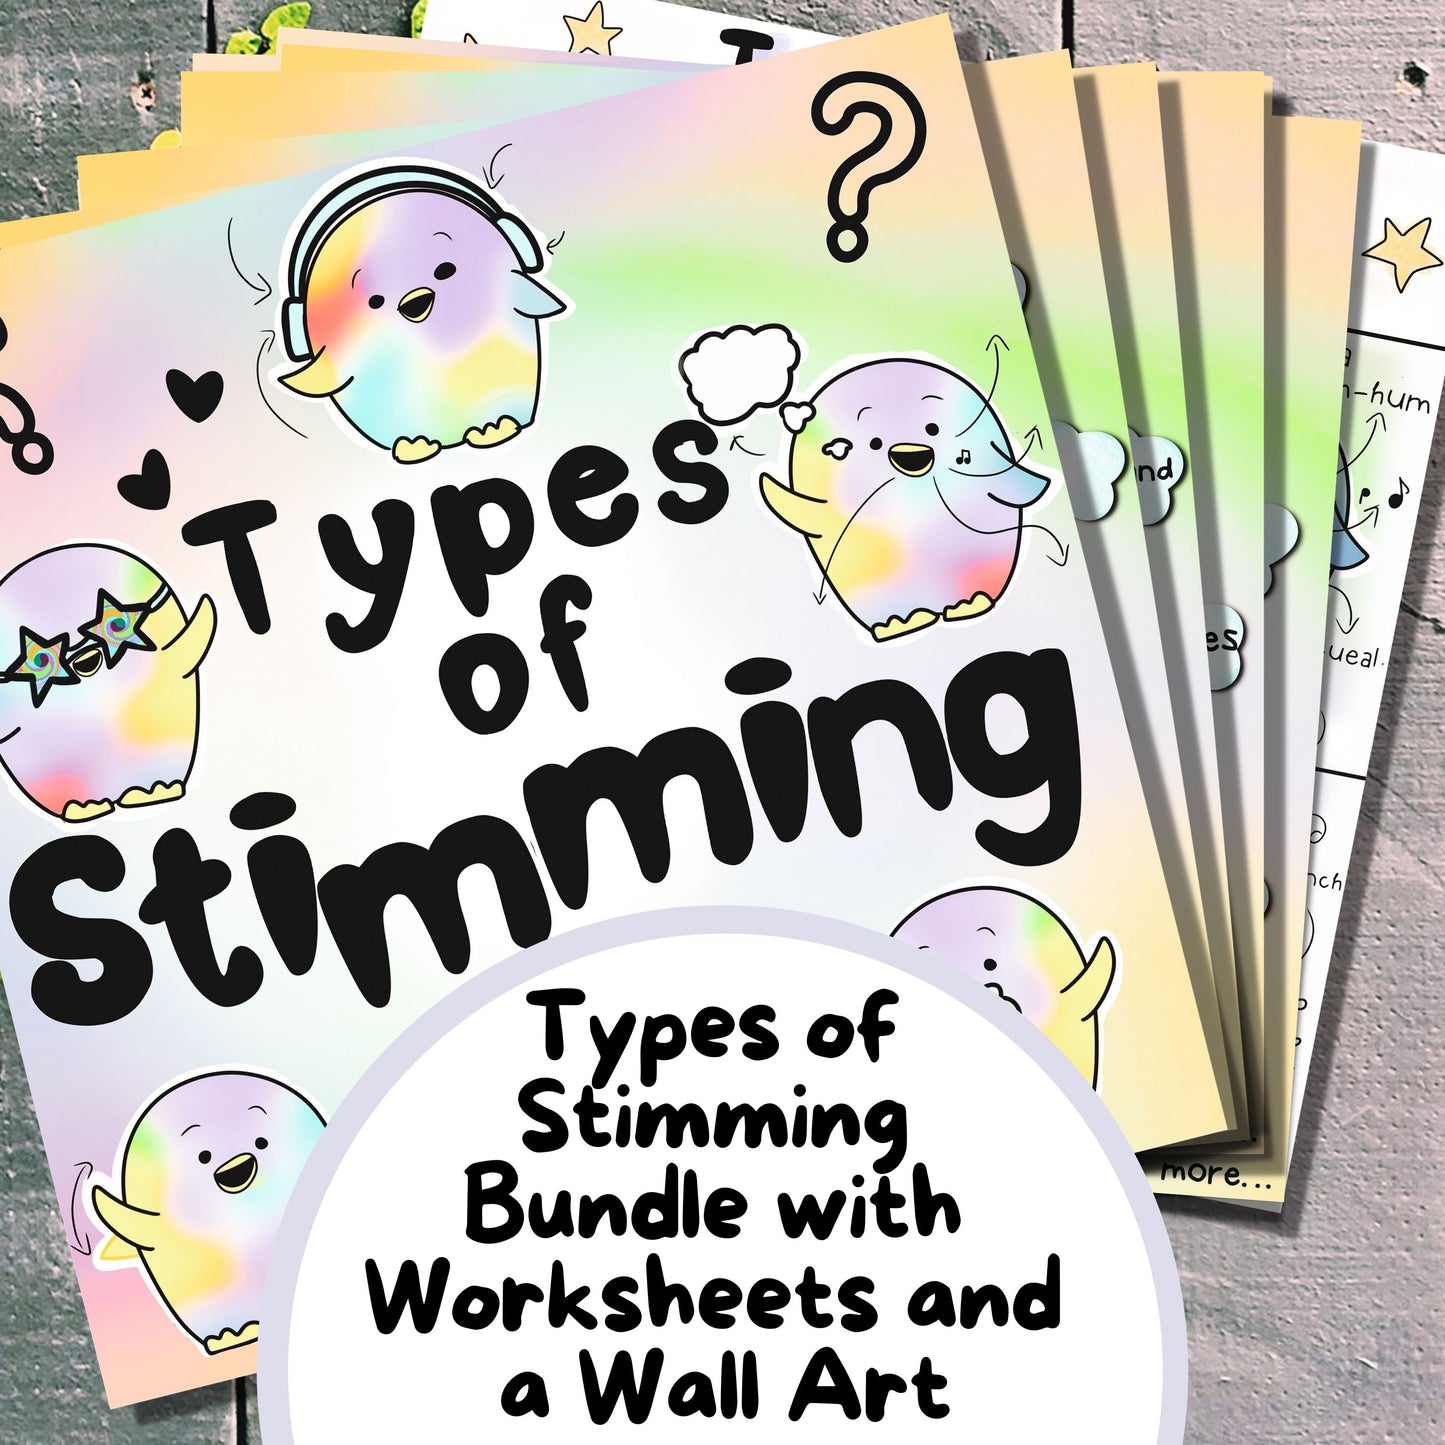 Types of Stimming Printable Bundle with blank worksheets.